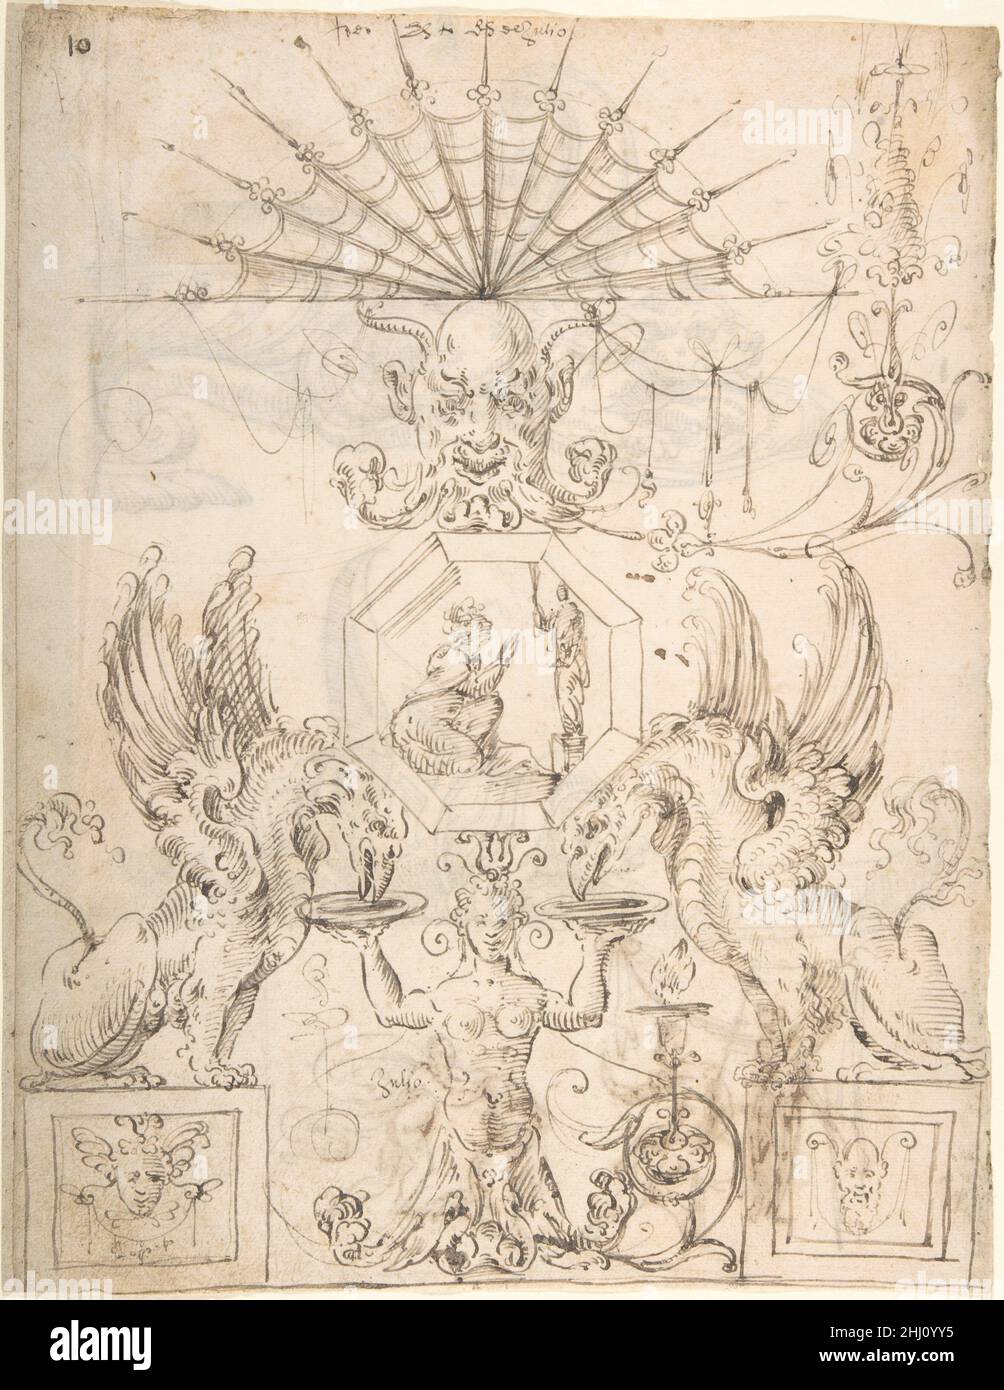 Grotesque Design with an Octagonal Panel in the Center and Two Griffins Drinking from PLates held up by a Hybrid Creature (recto); Two Turtles above a Scene with Four Figures (verso) ca. 1545–60 attributed to Andrés de Melgar Spanish. Grotesque Design with an Octagonal Panel in the Center and Two Griffins Drinking from PLates held up by a Hybrid Creature (recto); Two Turtles above a Scene with Four Figures (verso)  337501 Stock Photo